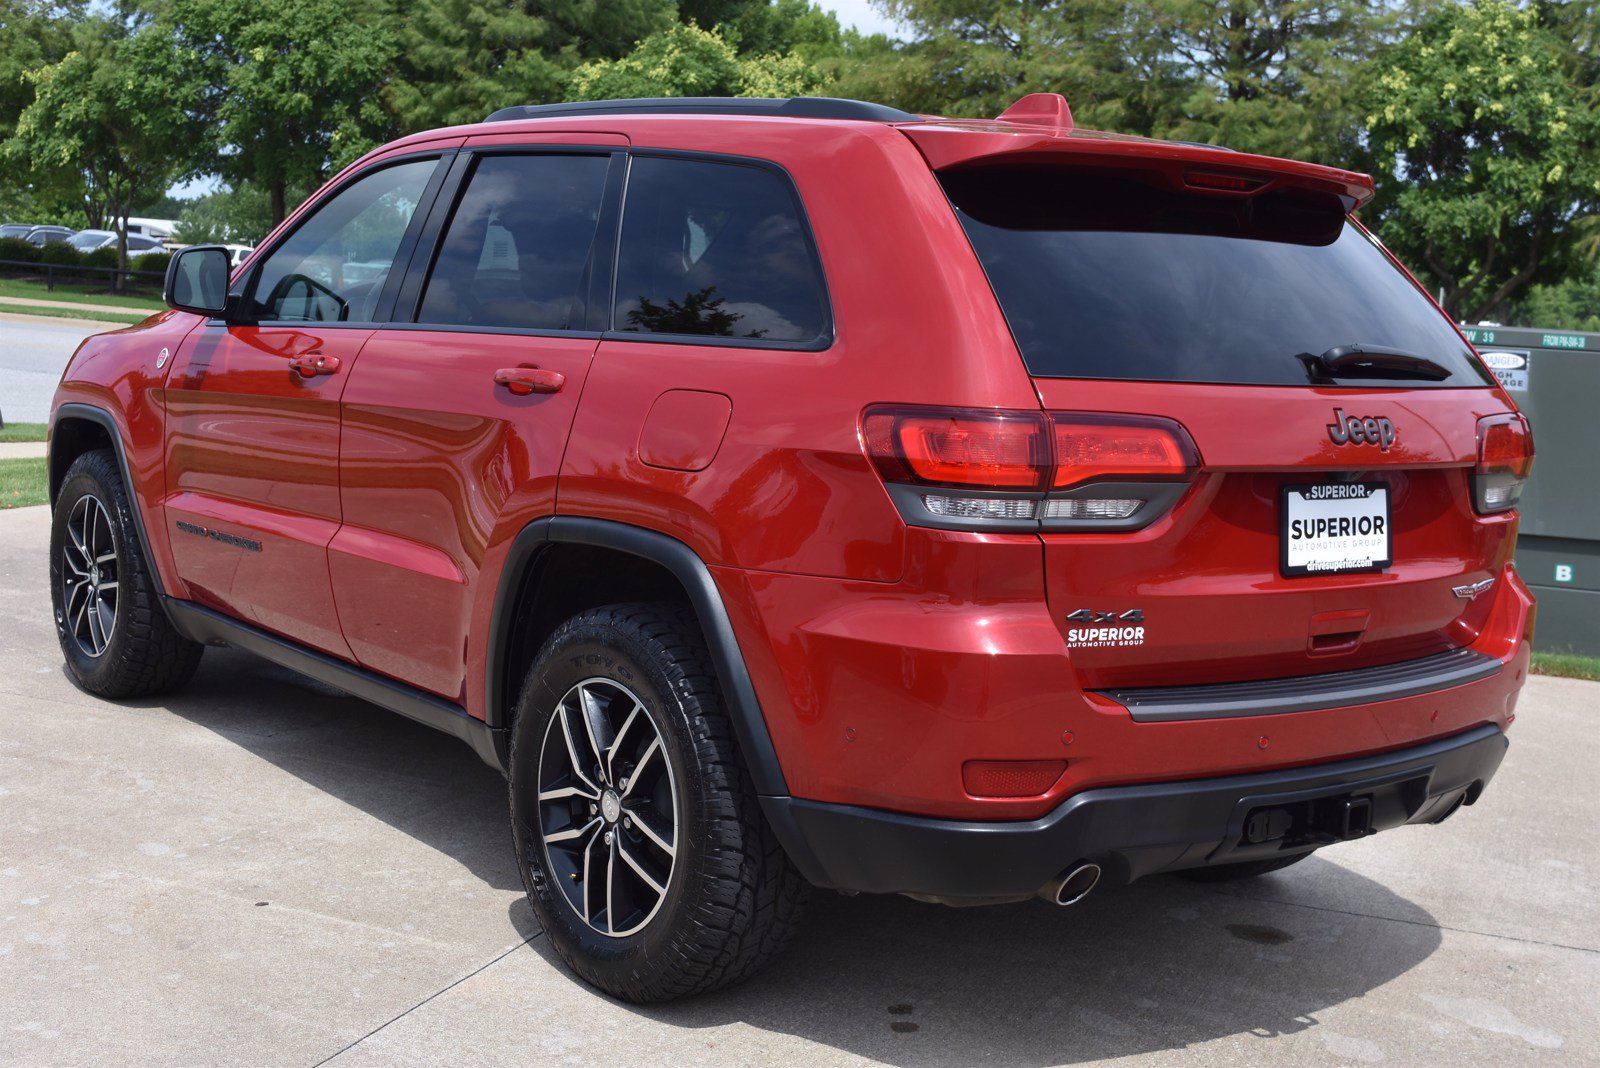 PreOwned 2017 Jeep Grand Cherokee Trailhawk 4WD Sport